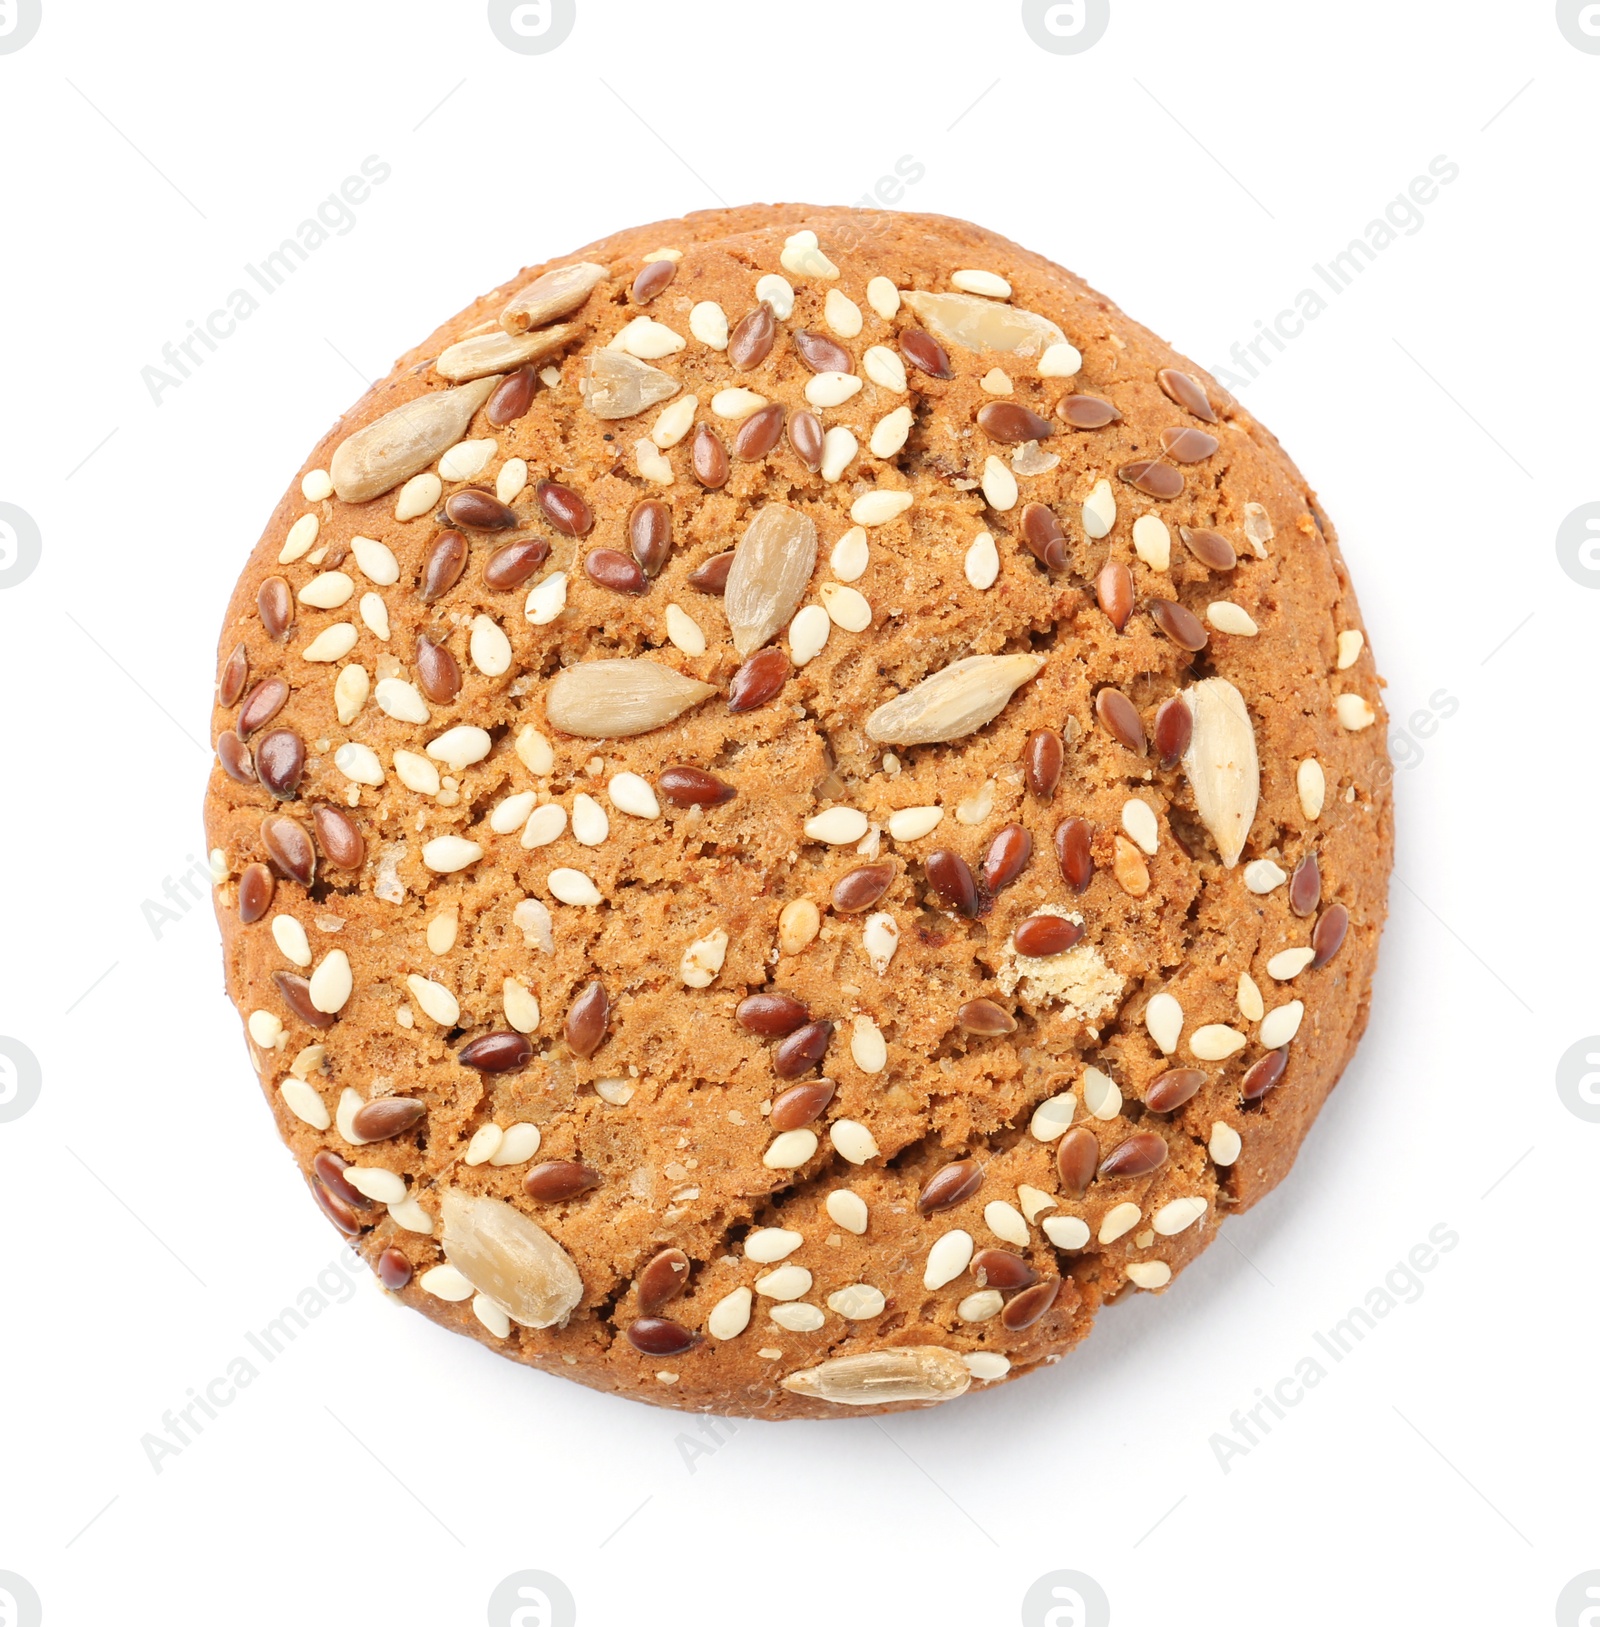 Photo of Grain cereal cookie on white background. Healthy snack